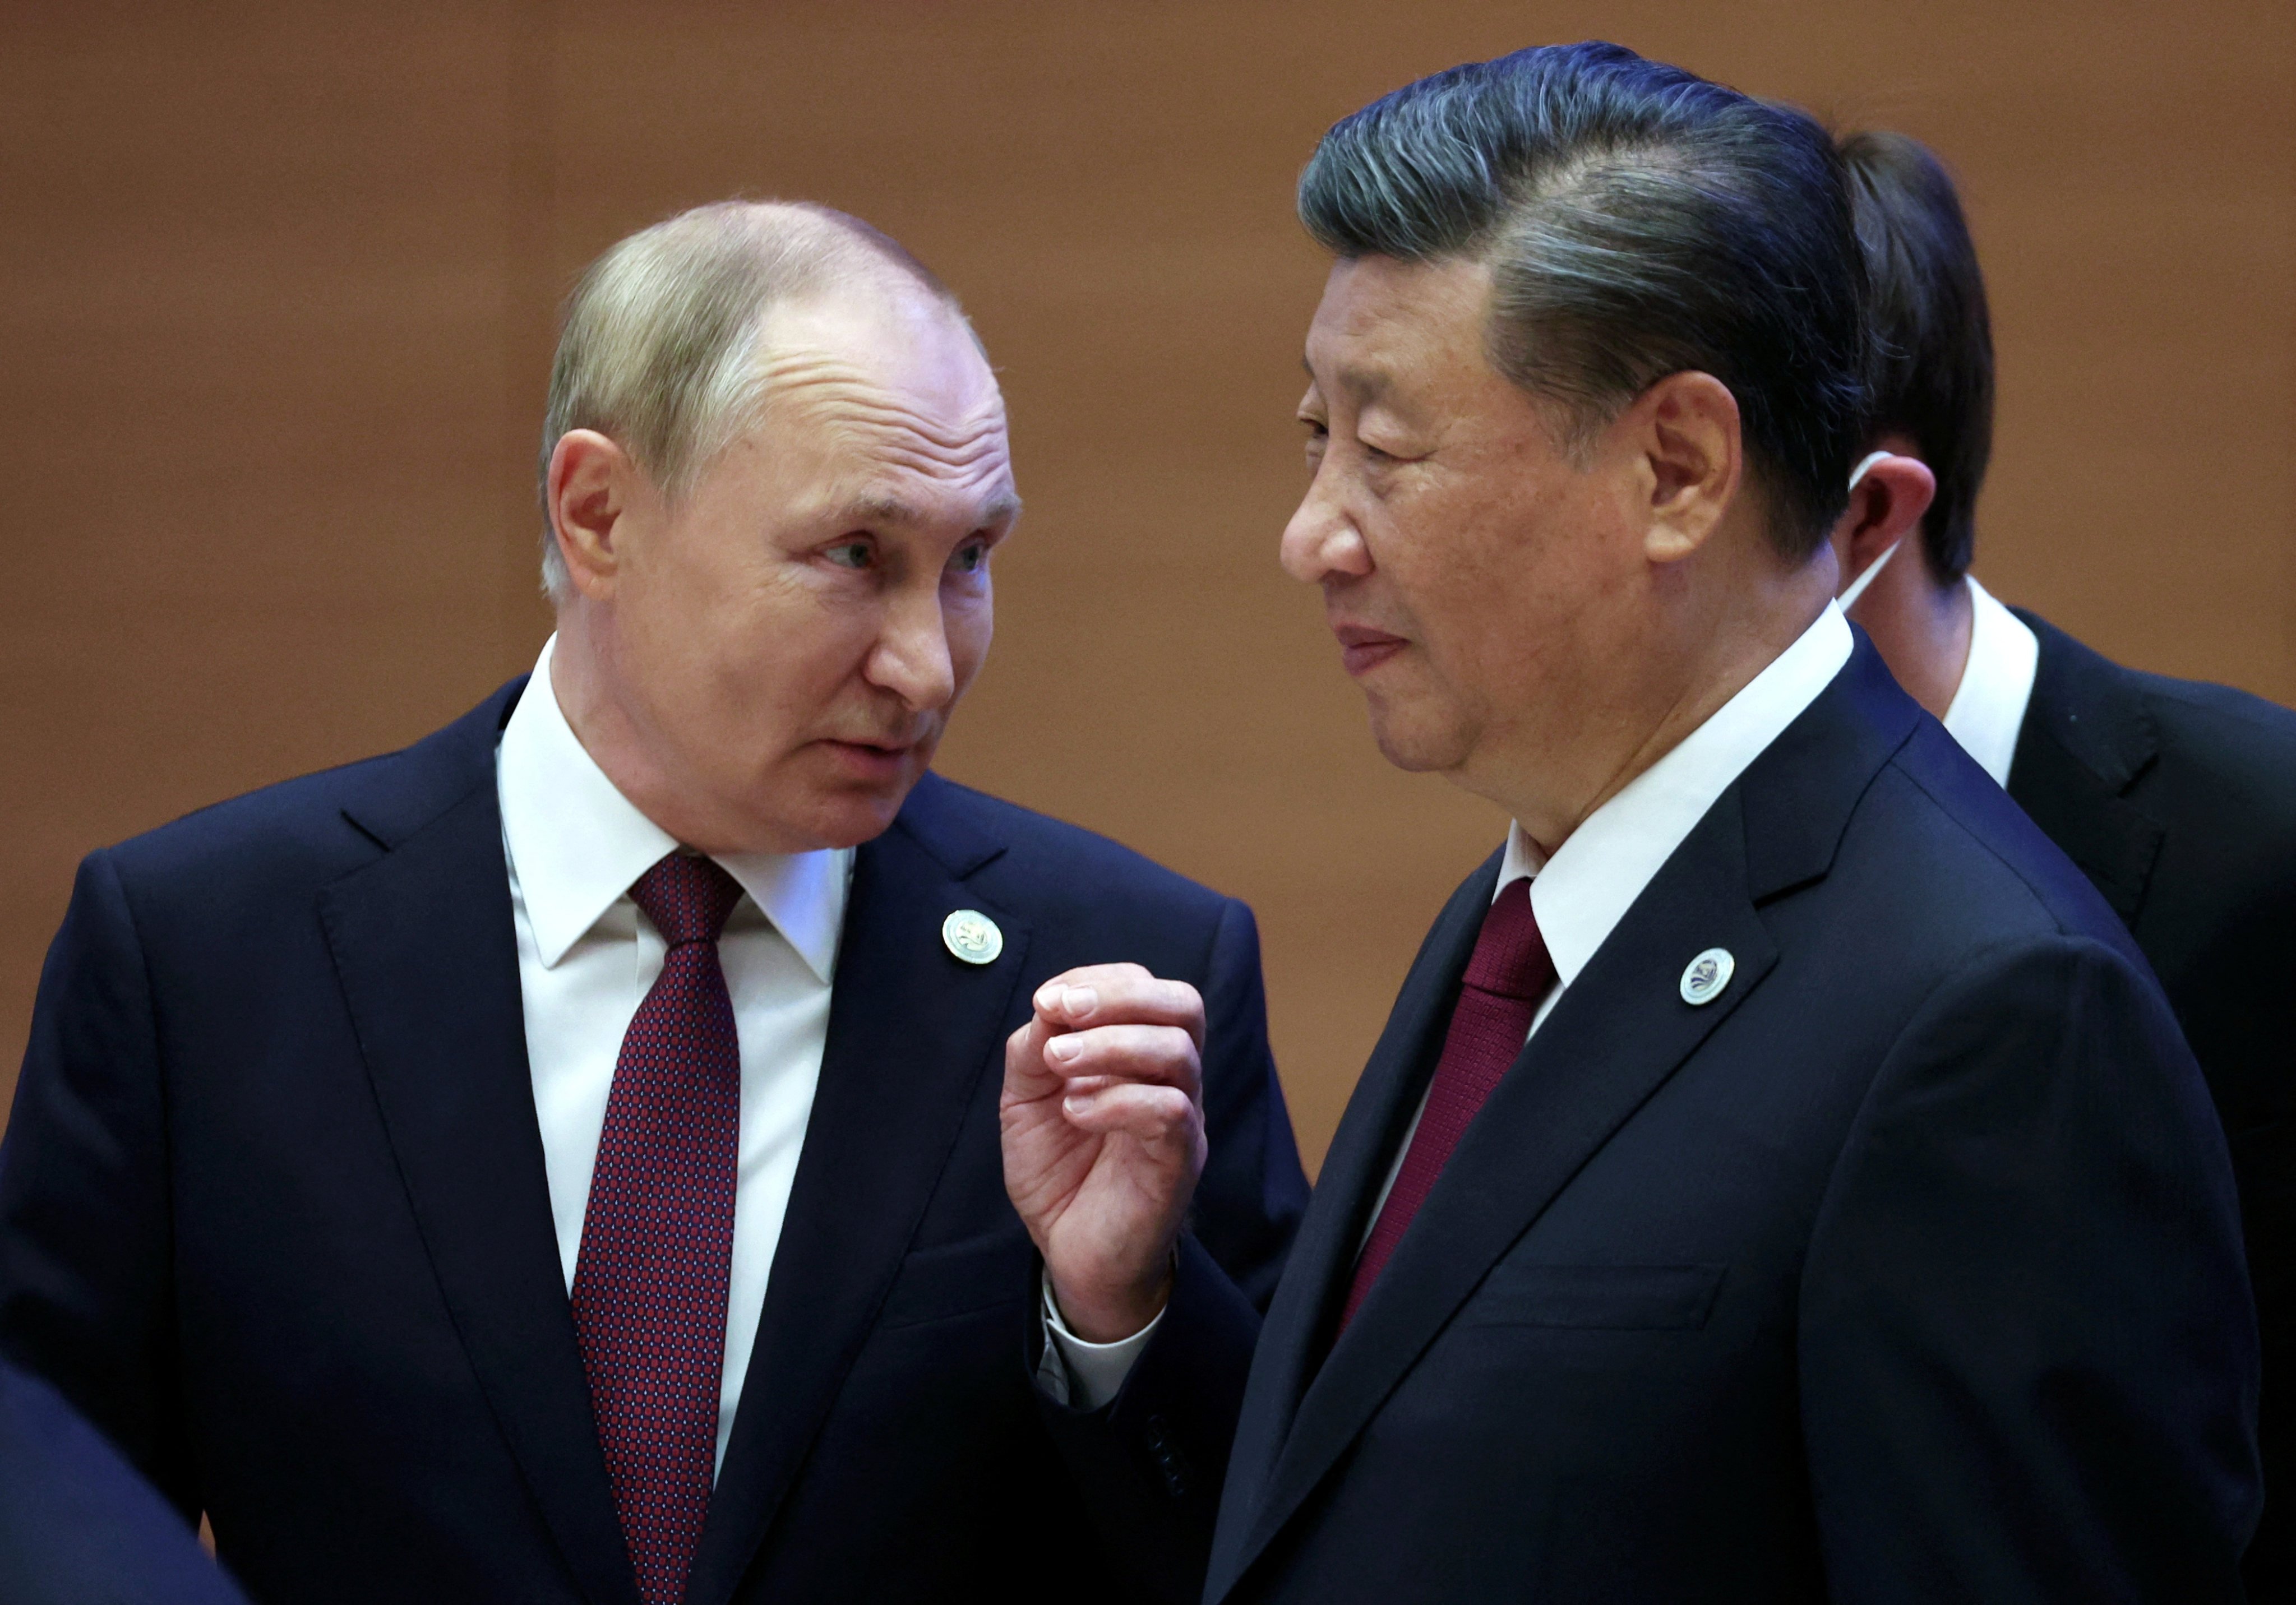 Xi Jinping attended the Shanghai Cooperation Organisation summit, where he met with Russian counterpart Vladimir Putin. Photo: Reuters